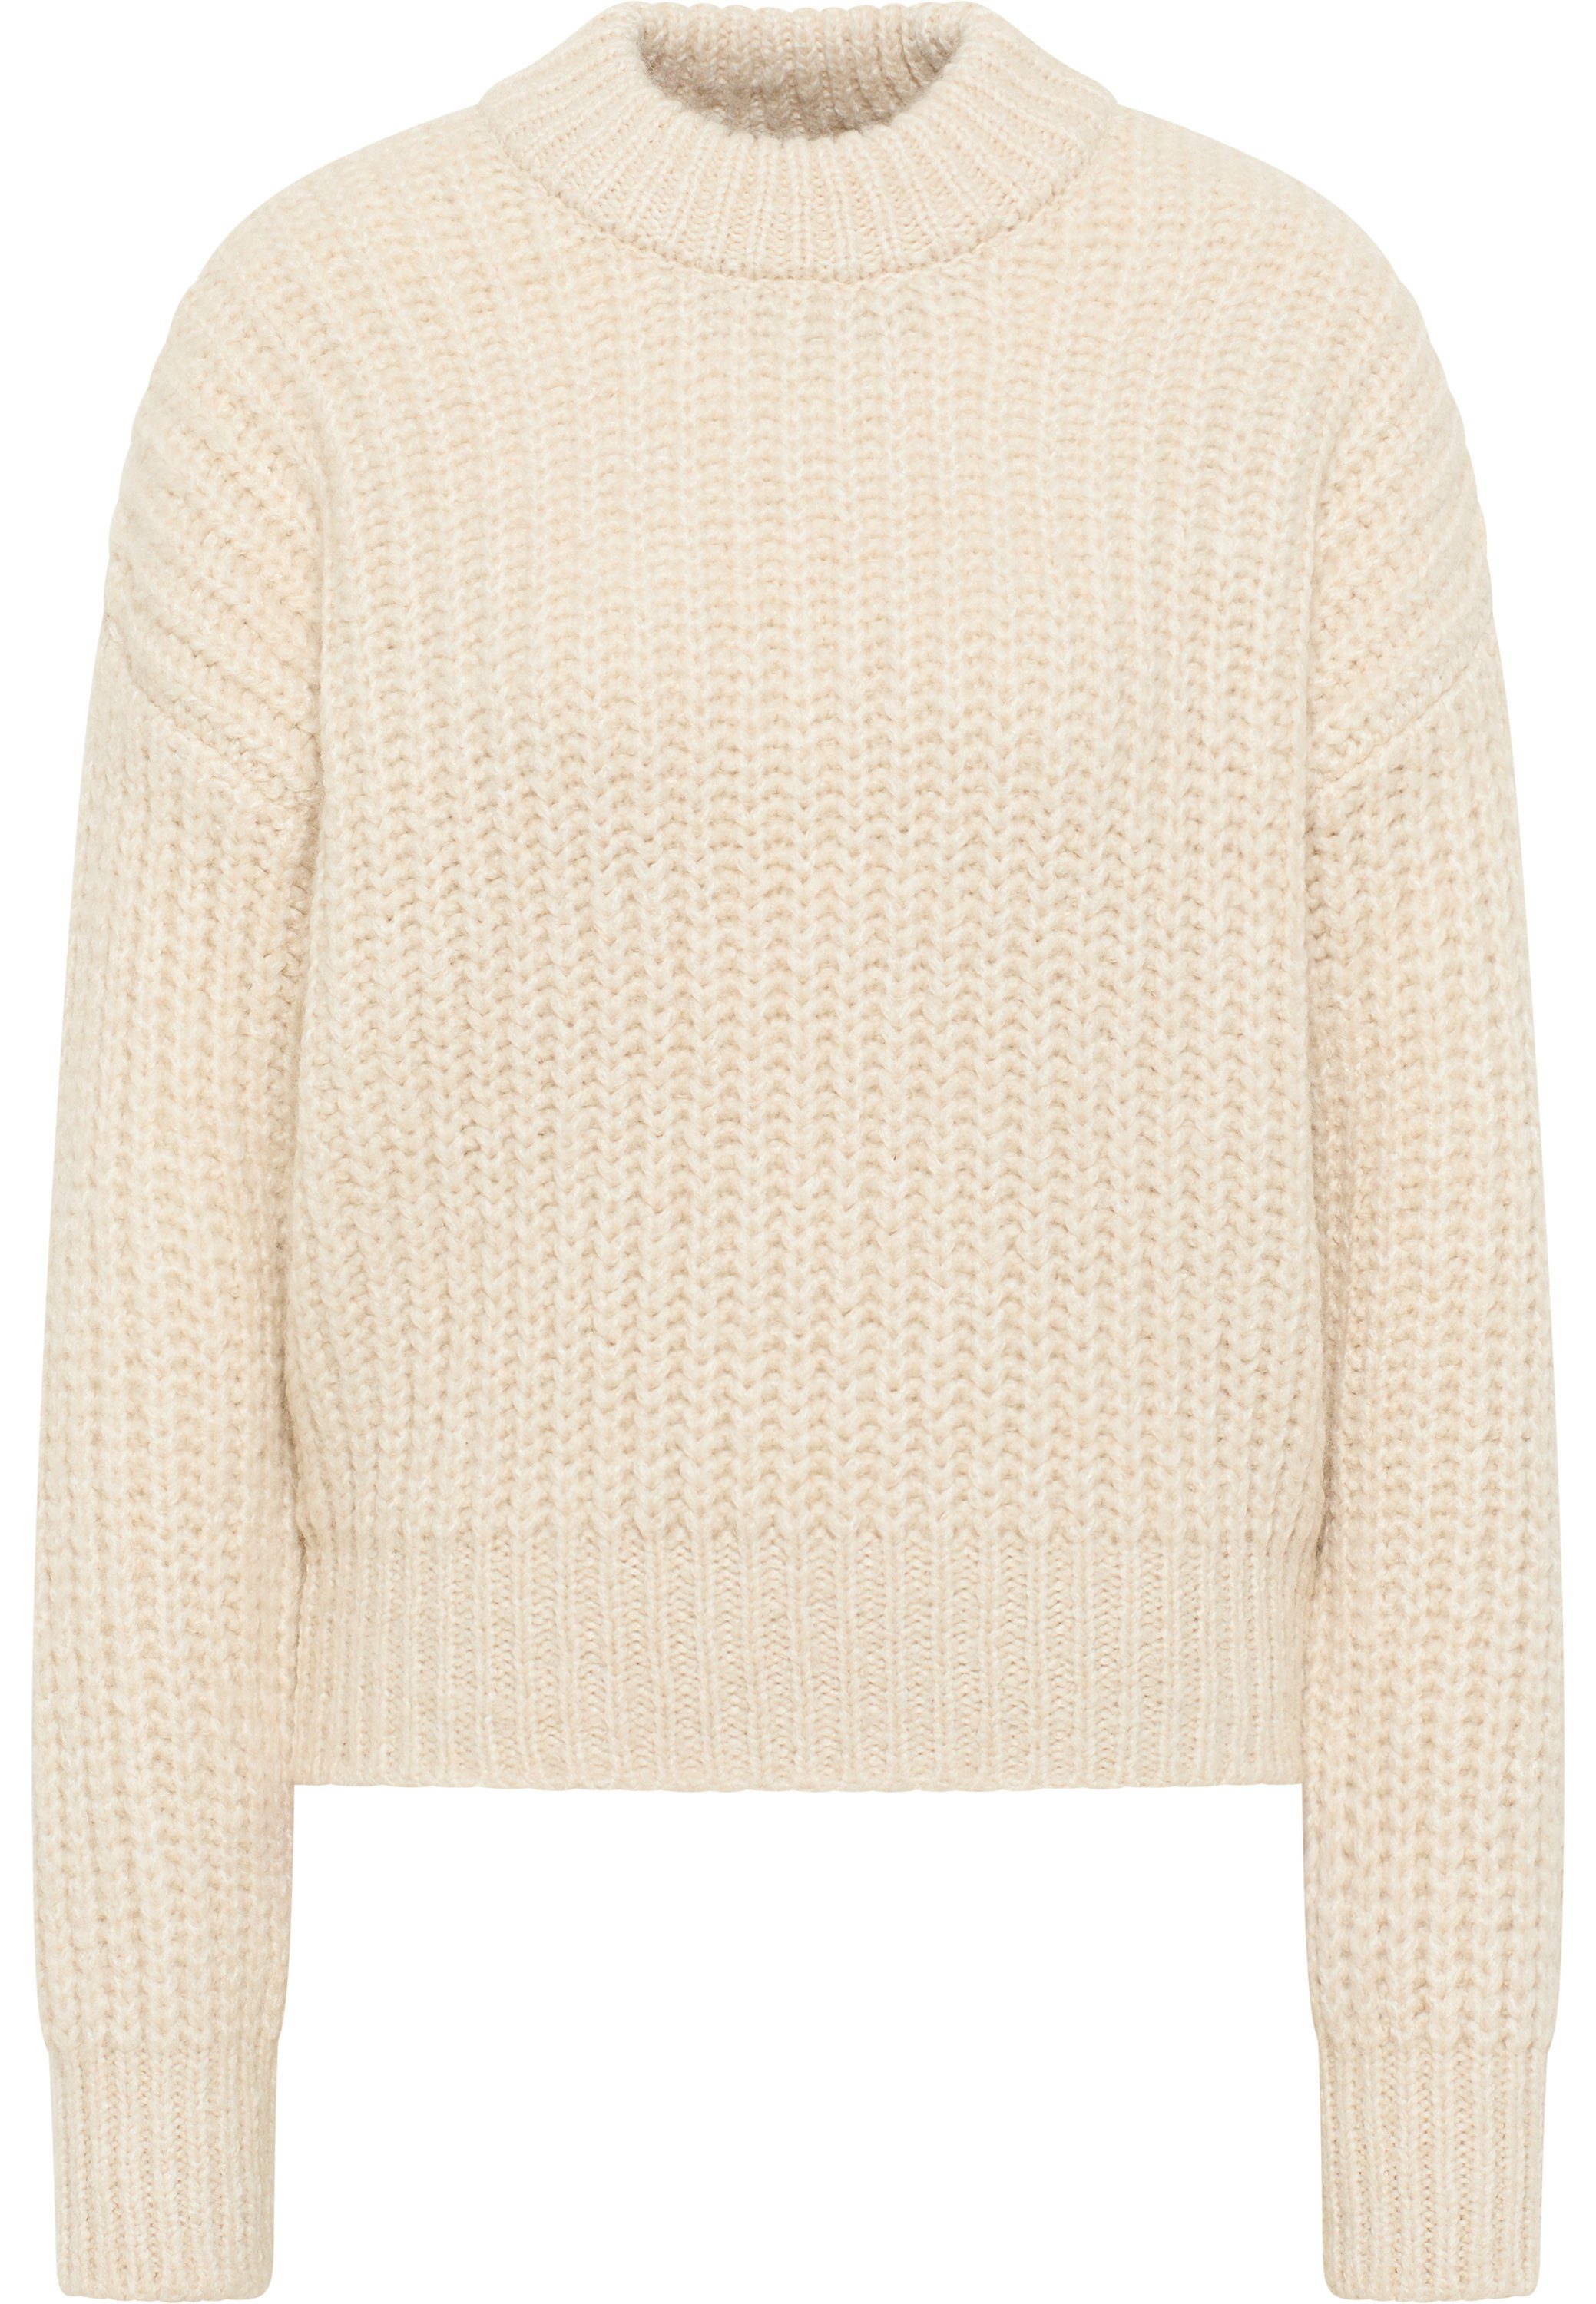 MUSTANG Sweater Mustang Strickpullover offwhite